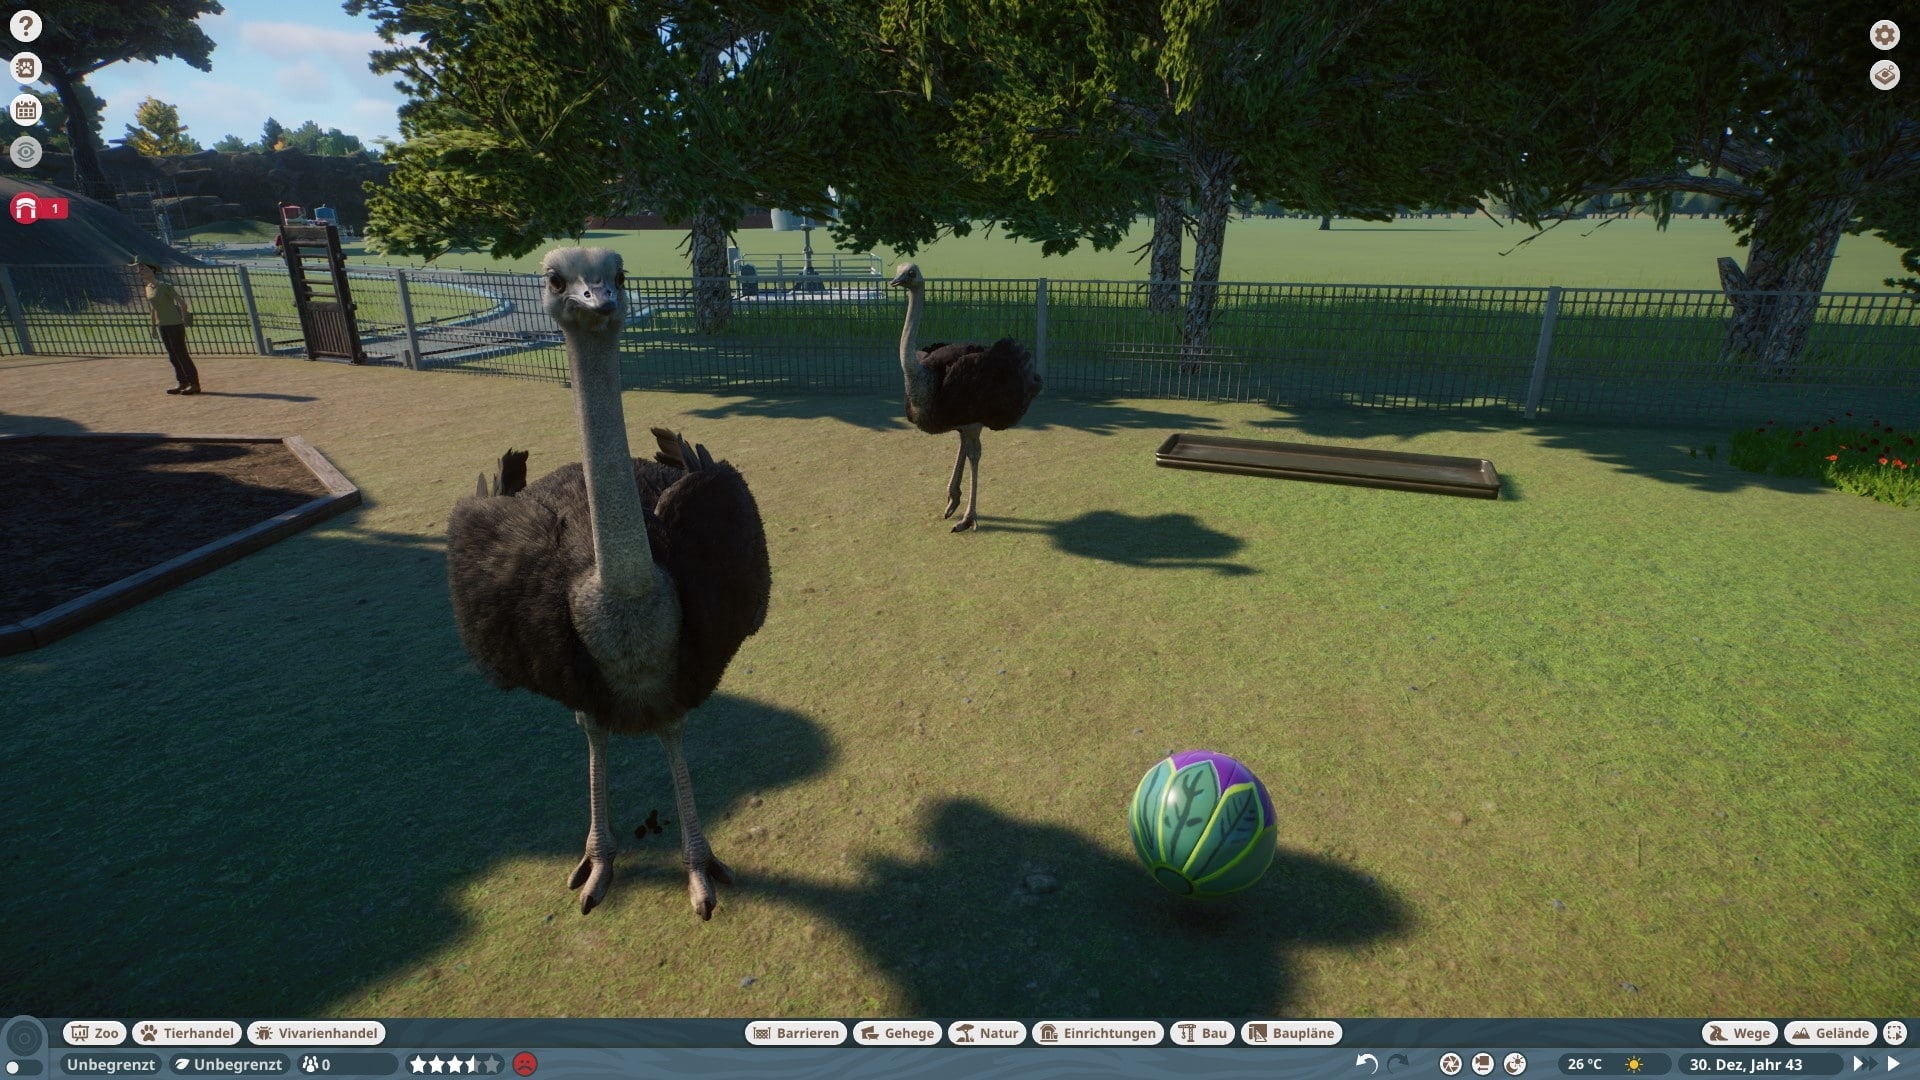 (Birds are still only available in the form of flightless animals. Even via DLC, no birdhouses were included.)